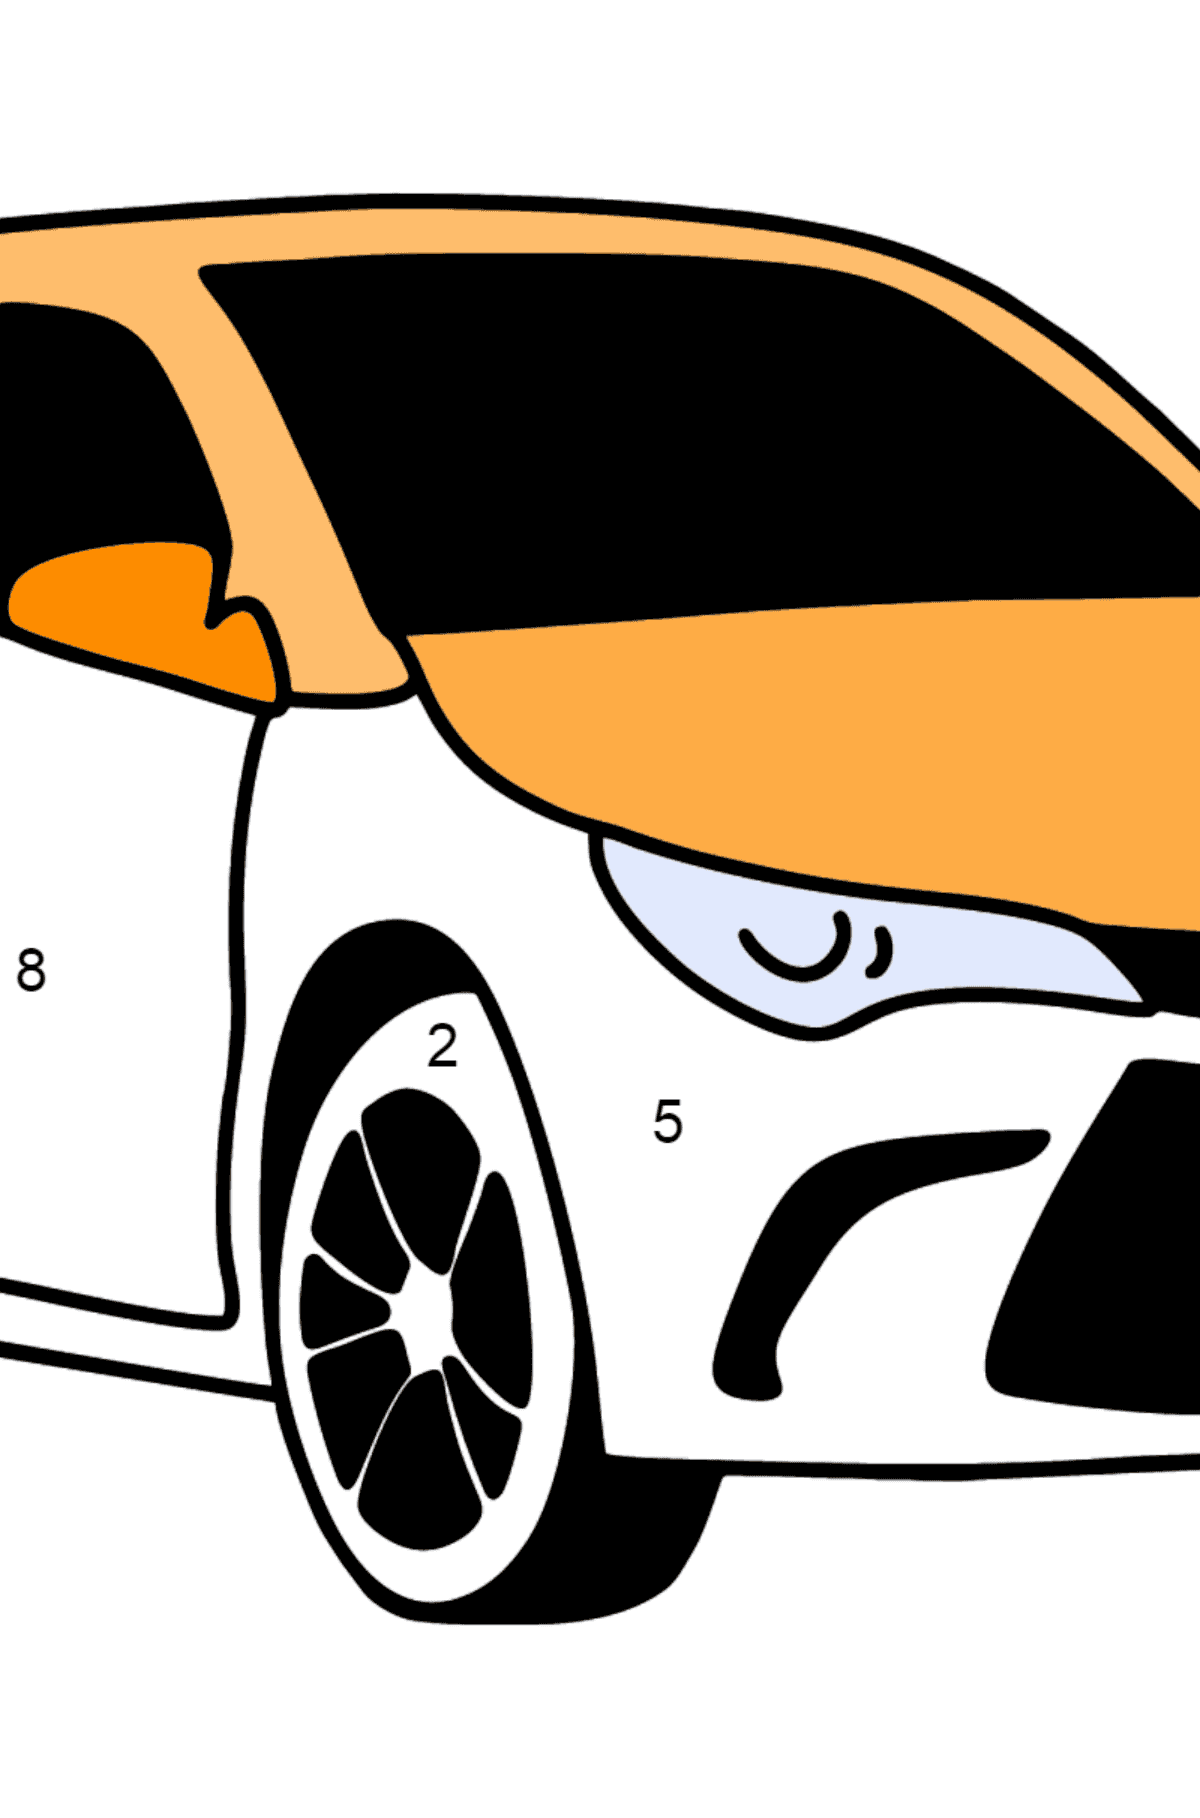 Toyota Camry coloring page - Coloring by Numbers for Kids